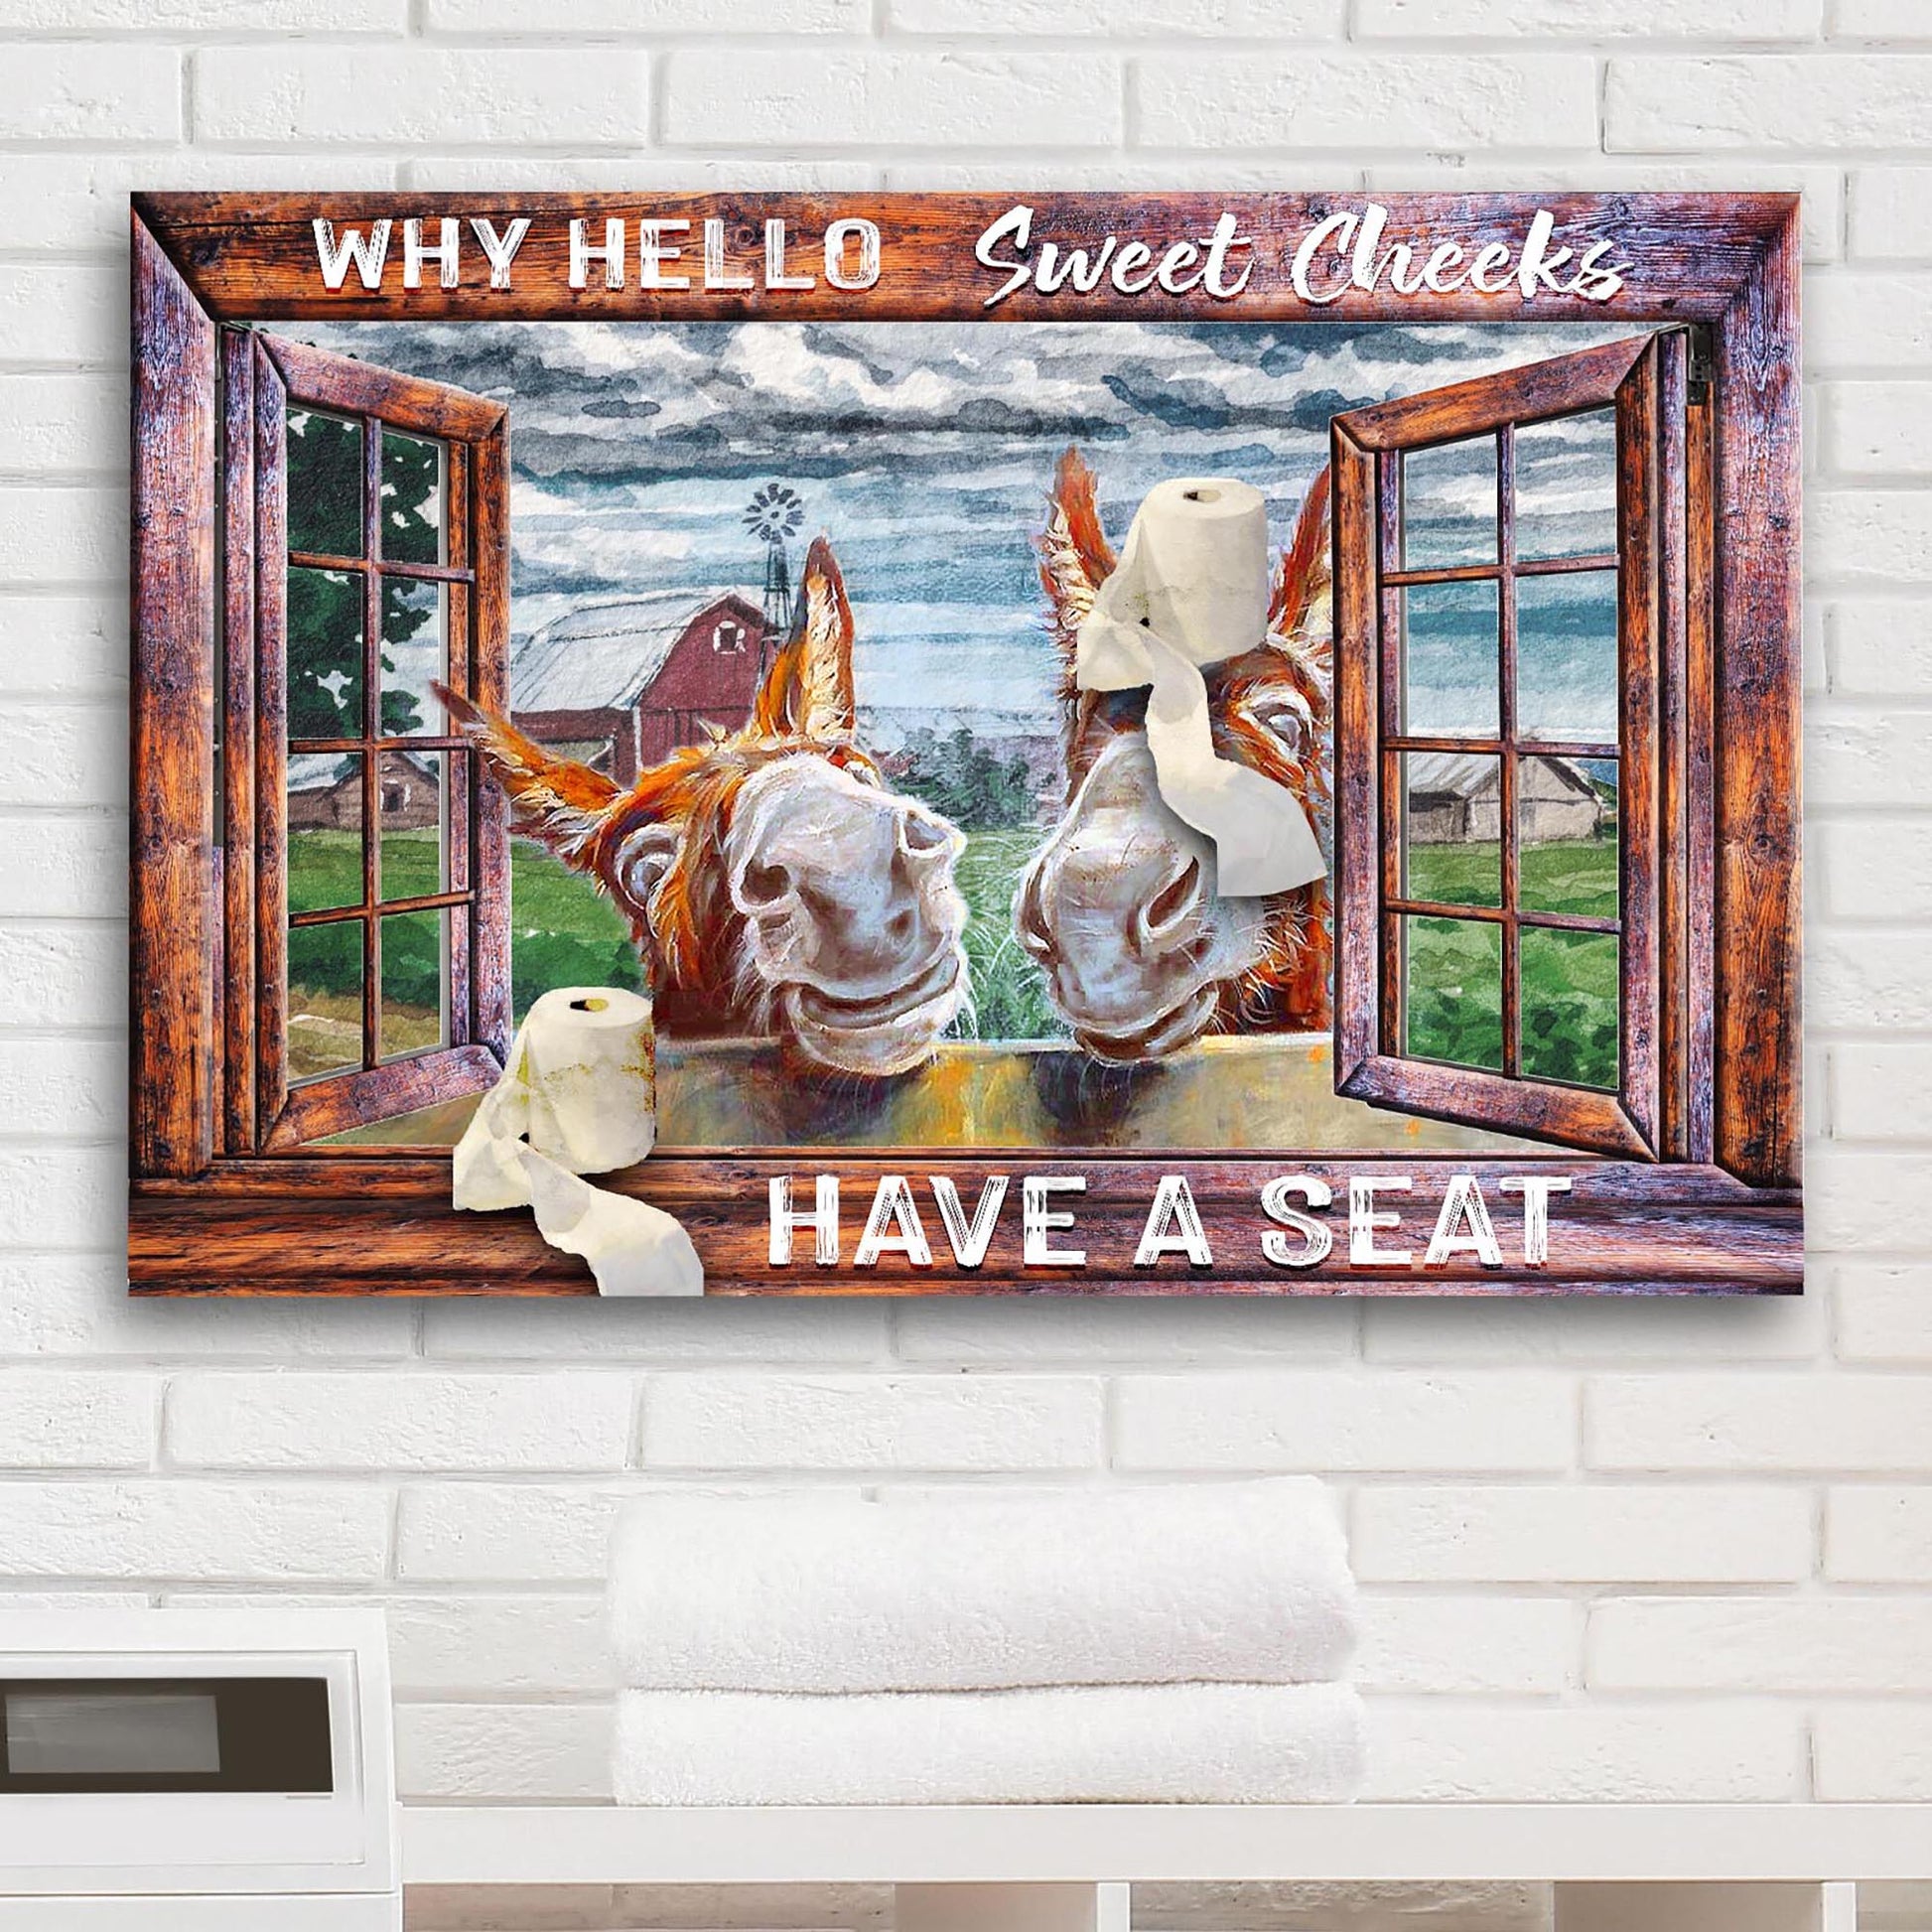 Have A Seat Sweet Cheeks Bathroom Sign II - Image by Tailored Canvases